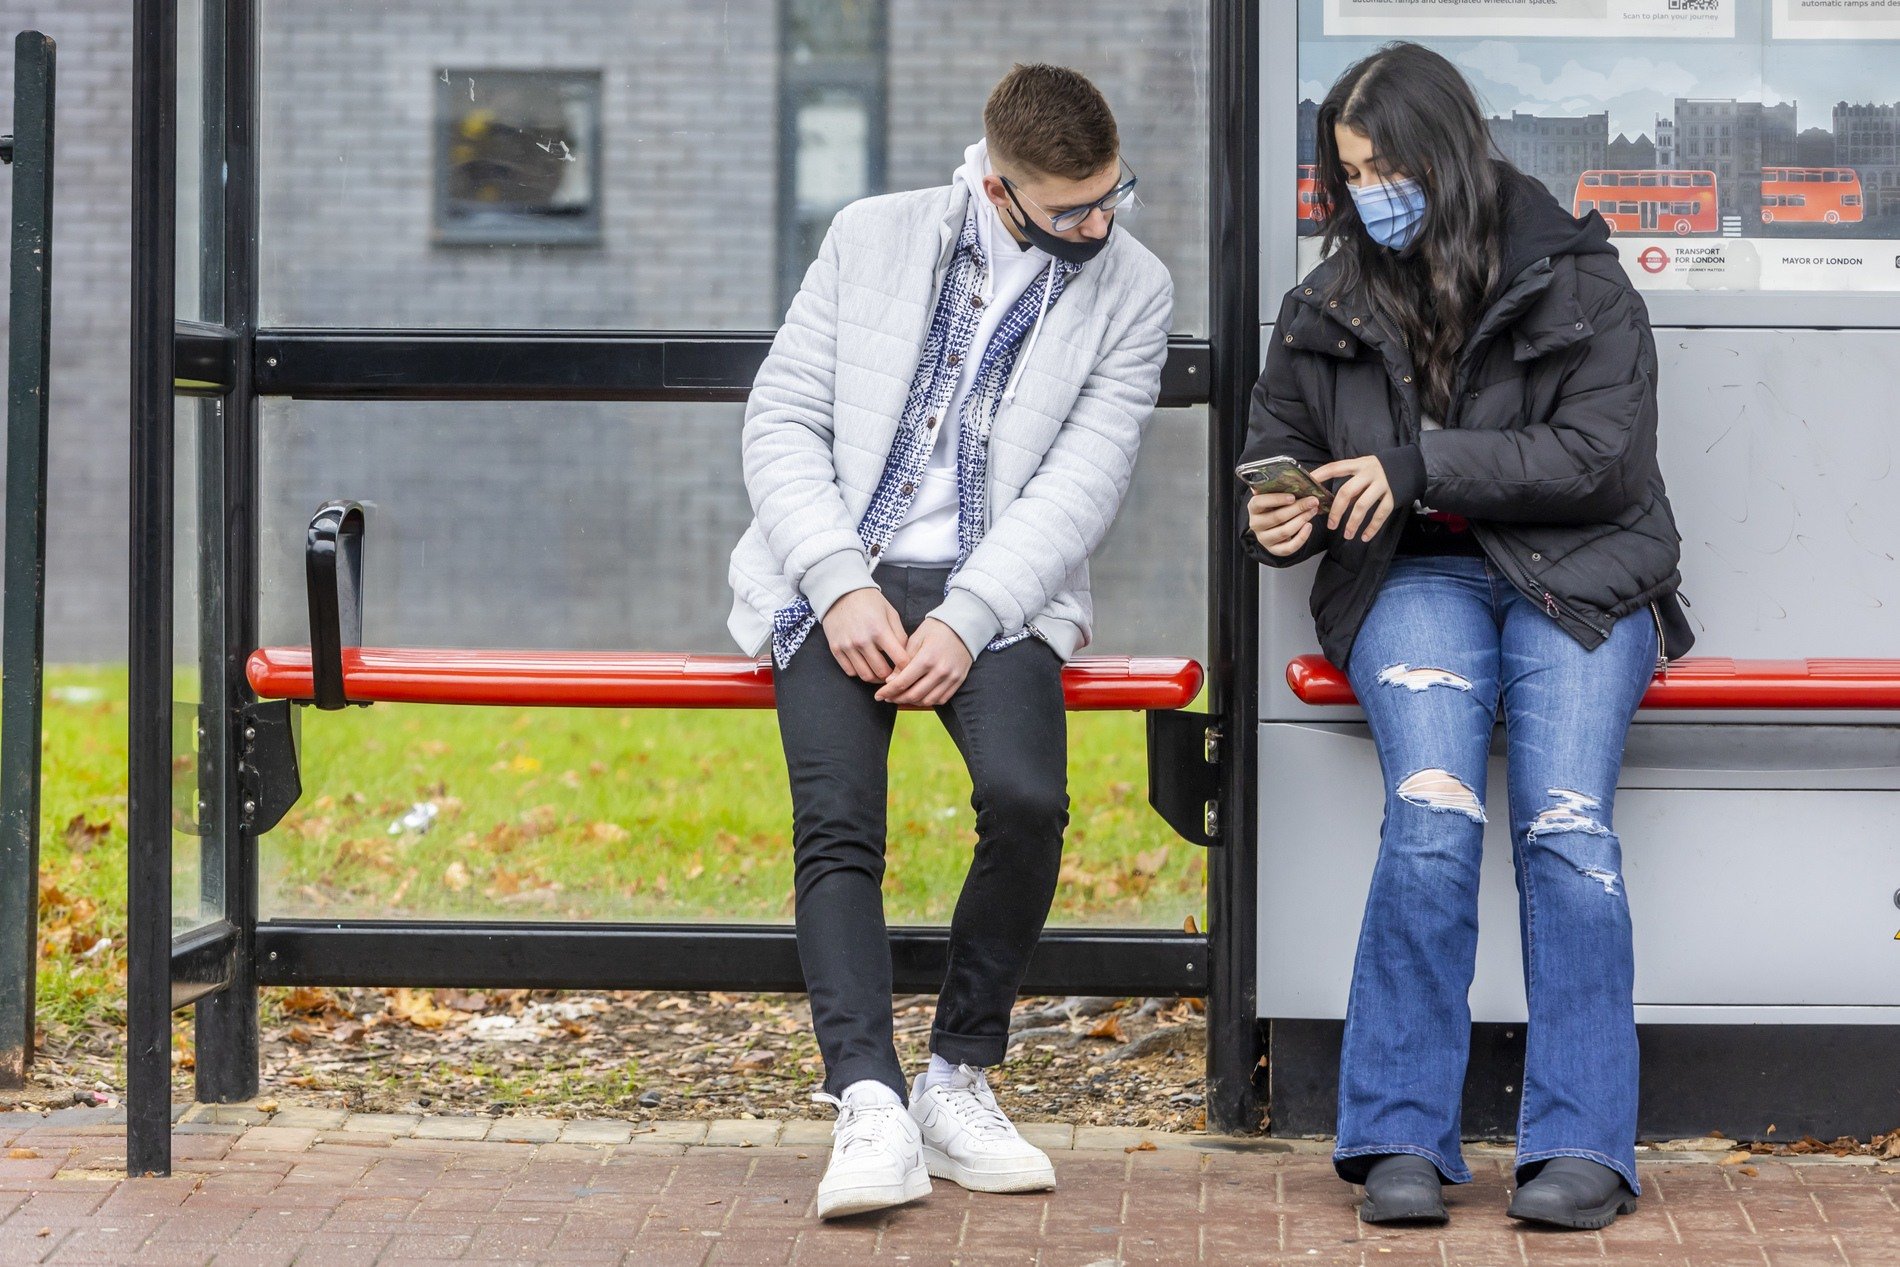 Two young people are at a bus stop. They are looking up PAYE tax. This is a full-body image.